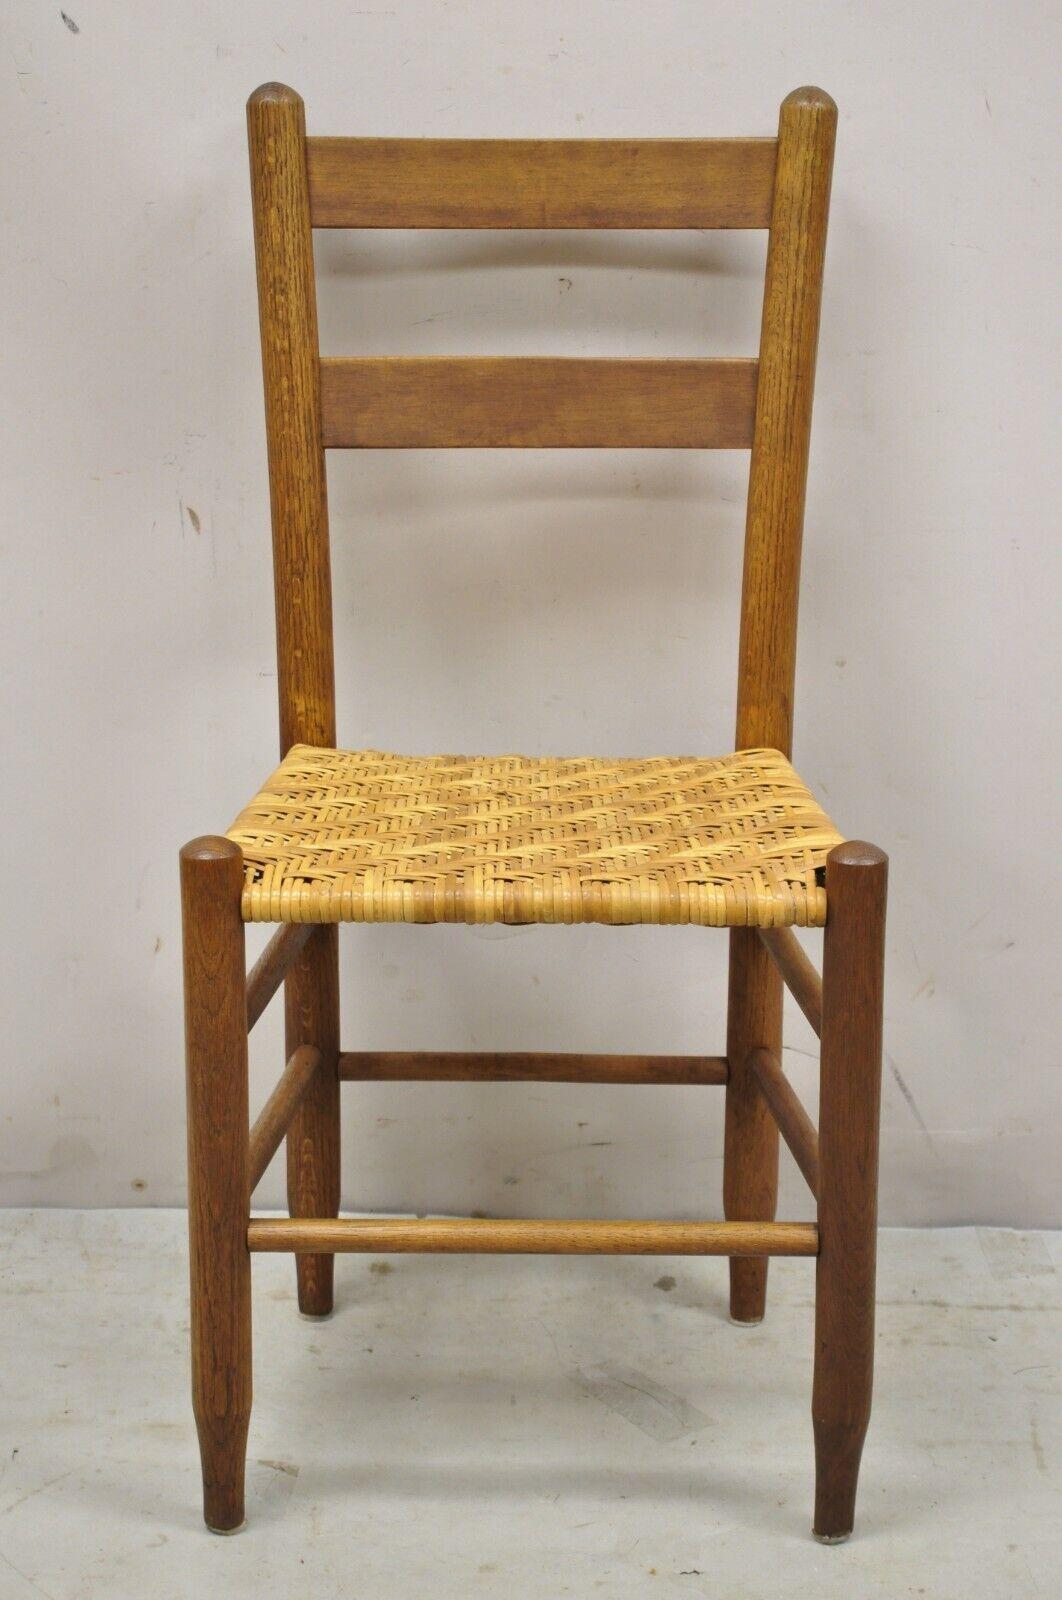 Vintage French country primitive oak ladderback small rattan dining chairs - set of 4. Item features woven rattan seats, nice smaller size, solid wood construction, beautiful wood grain, quality American craftsmanship, great style and form. circa